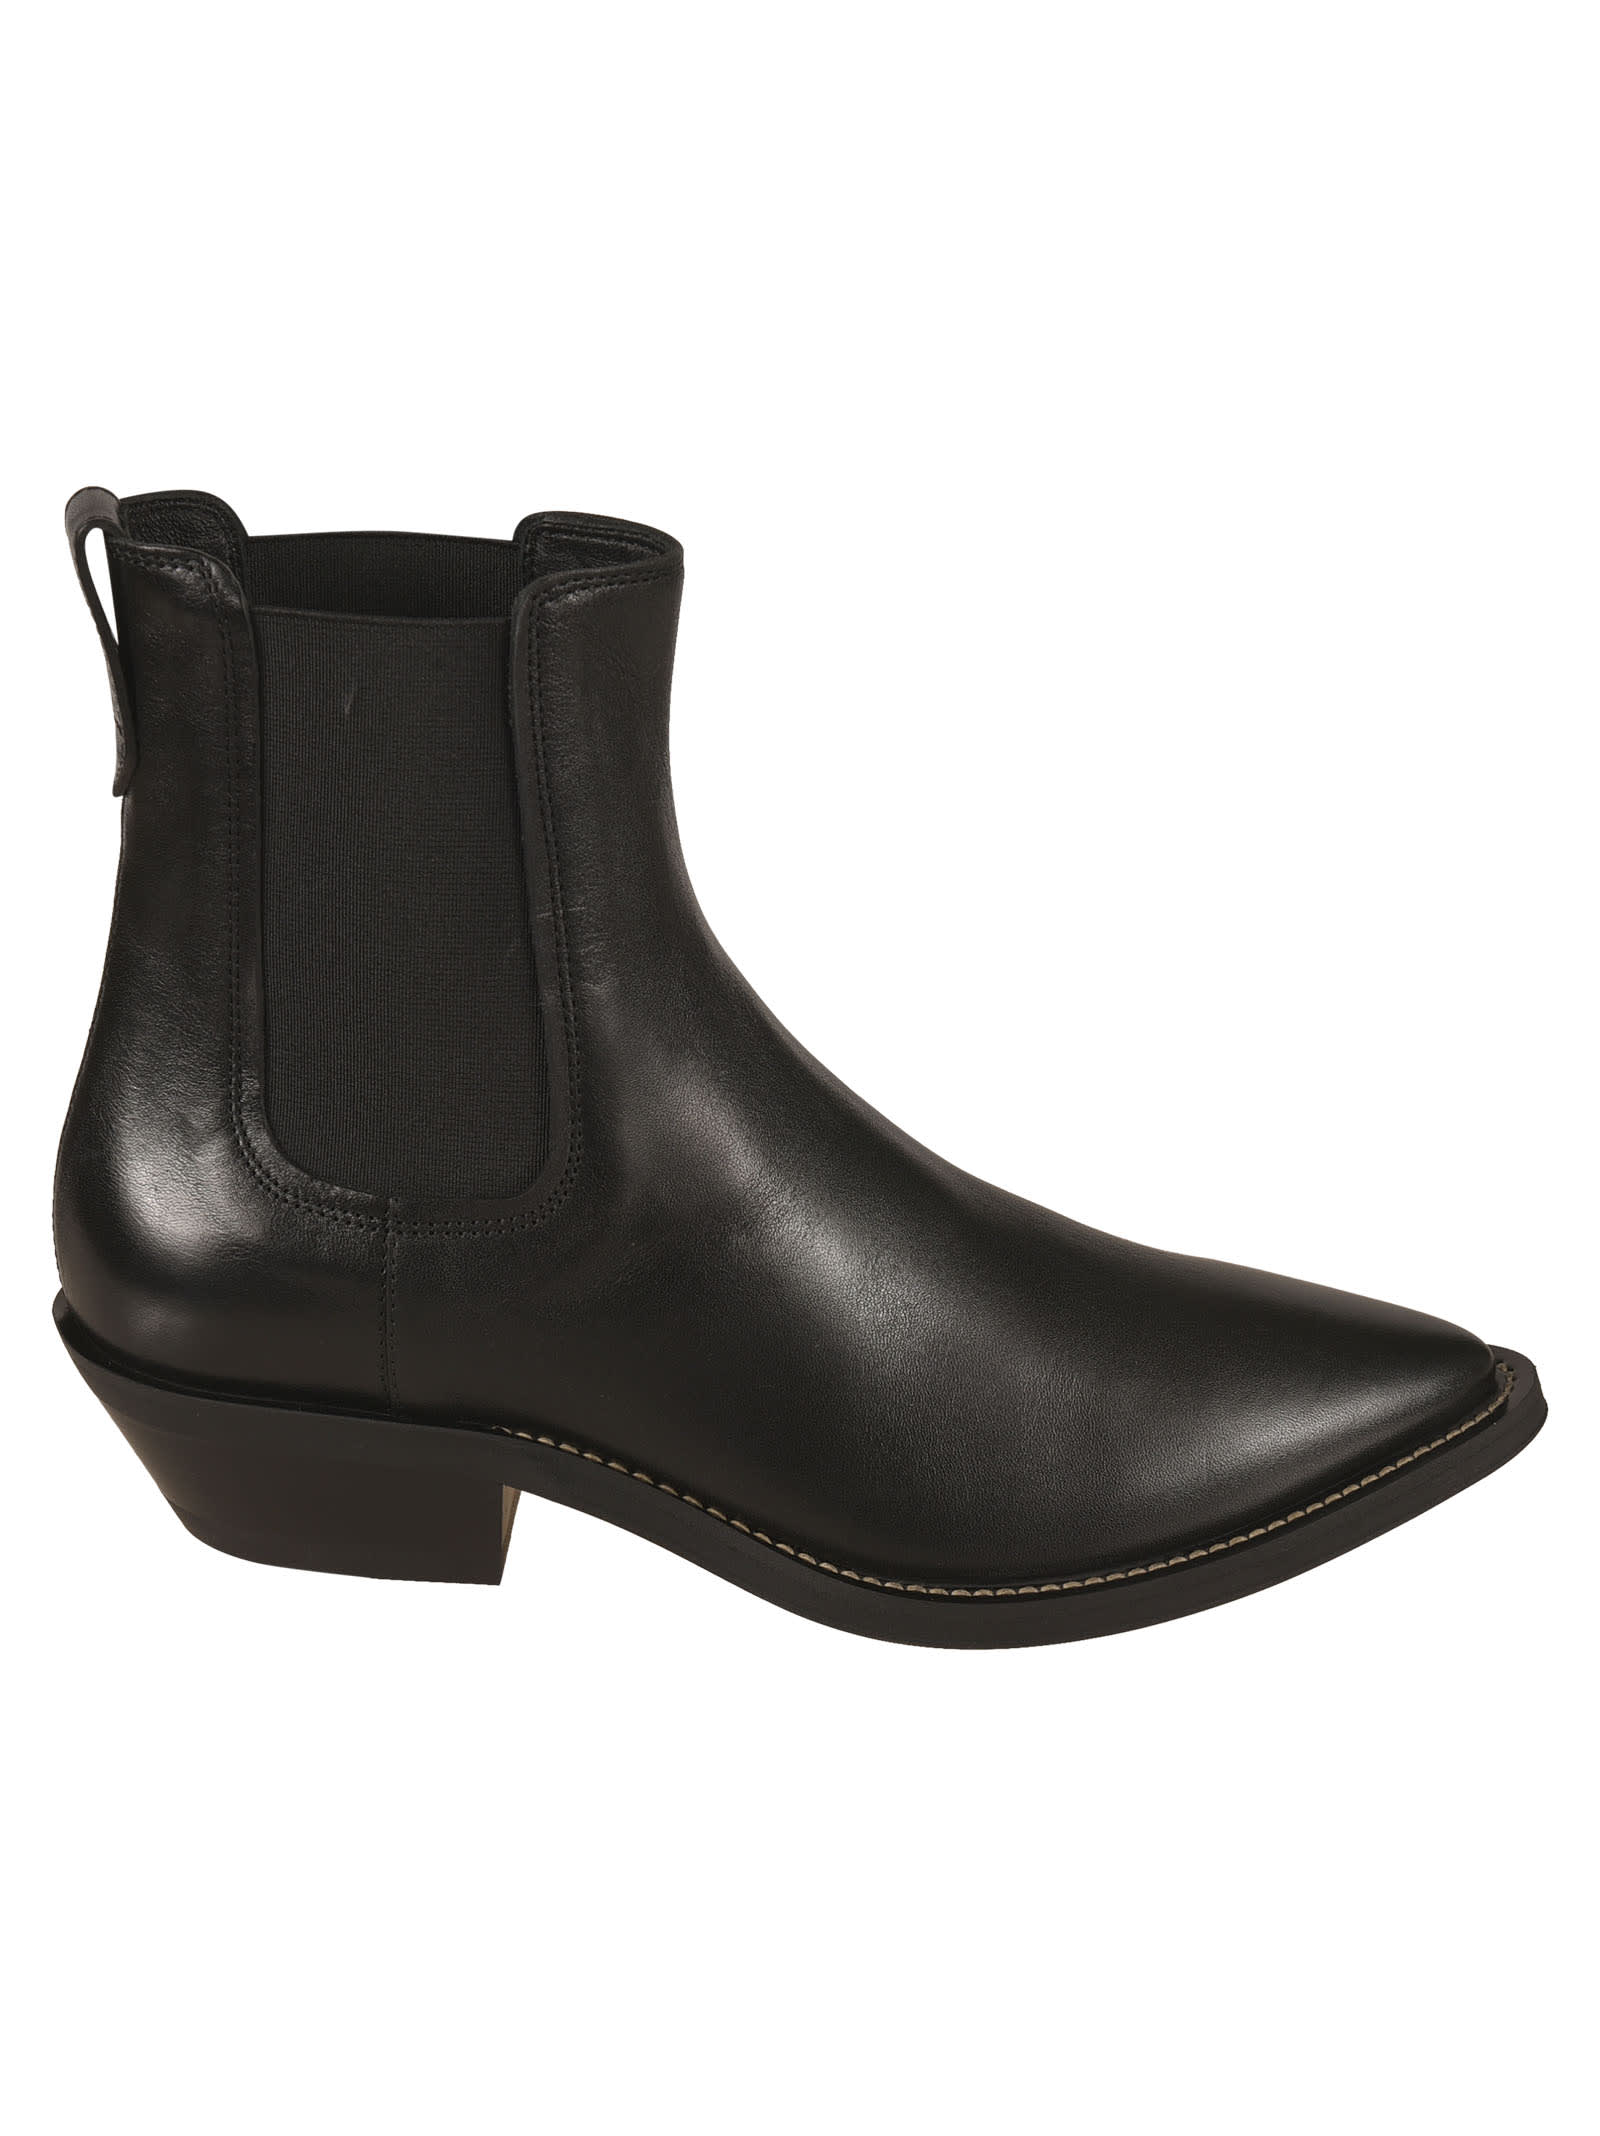 Tods Elastic Side Pointed Toe Ankle Boots